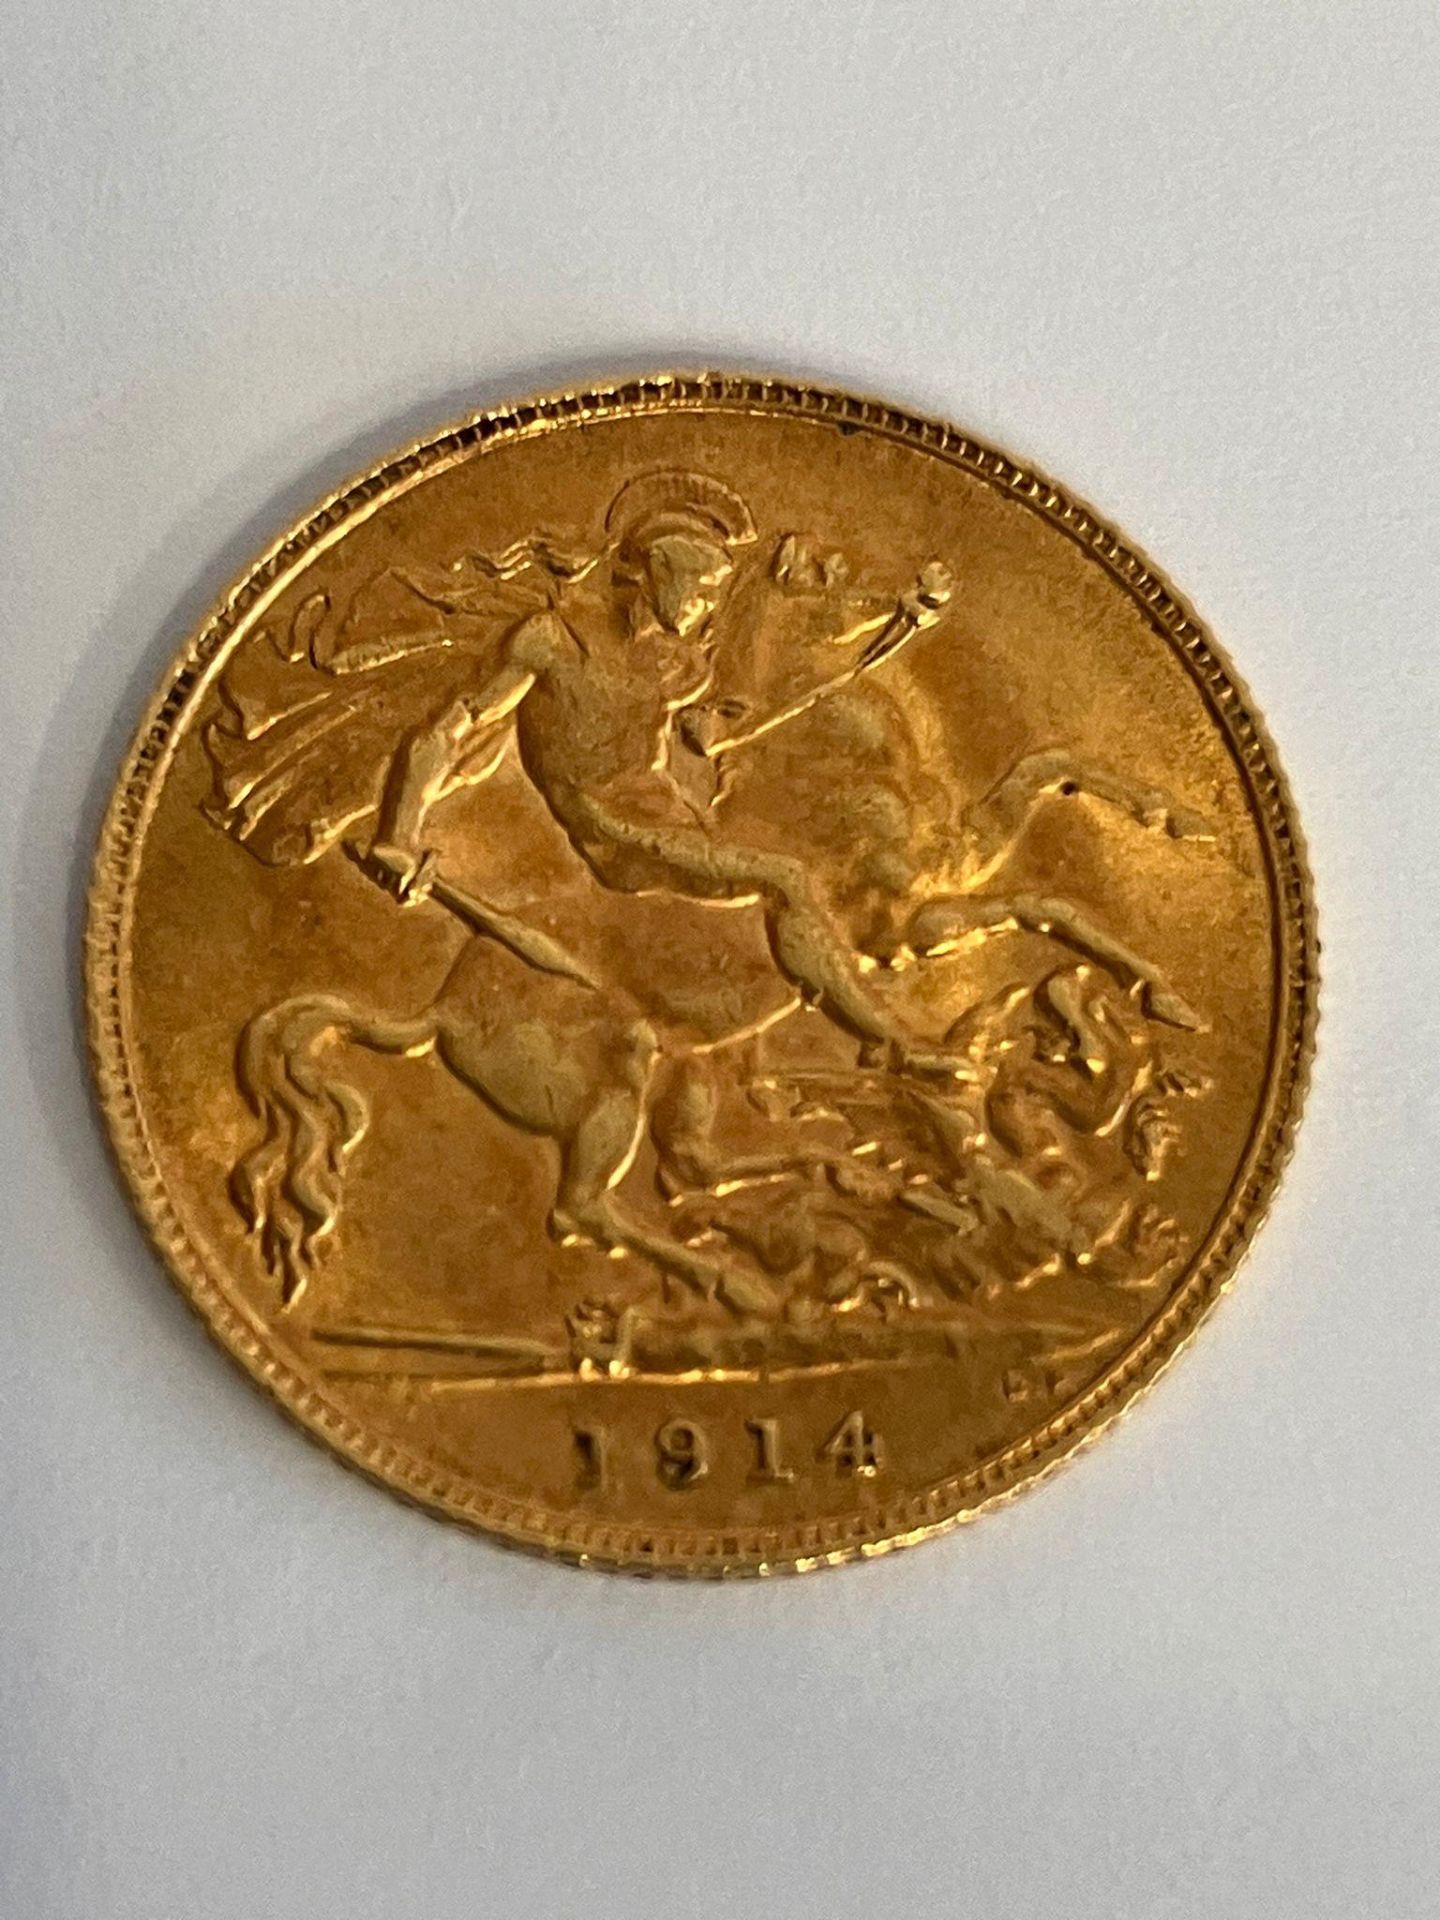 1914 HALF SOVEREIGN. 22 carat Gold. London Mint. Very fine condition. Please see pictures. - Image 3 of 3